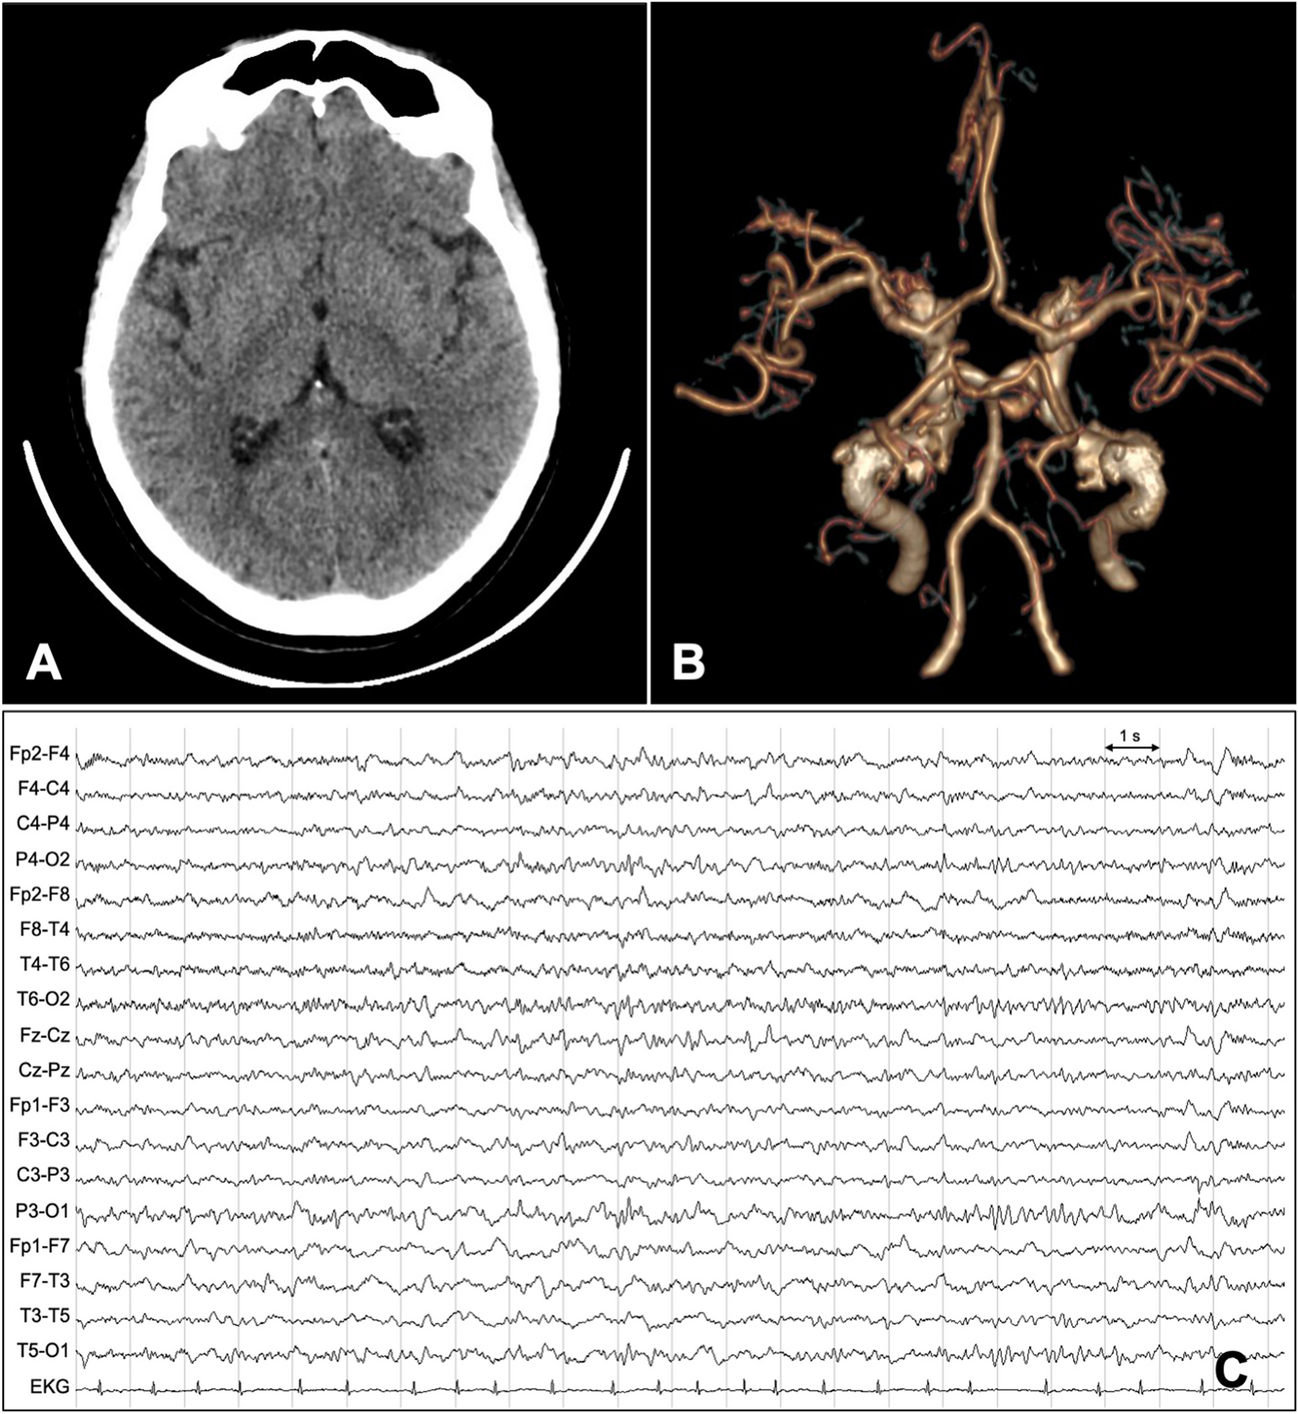 Transient side-changing hemispheric dysfunction: an unusual presentation of bilateral thalamic infarction mimicking large vessel occlusion